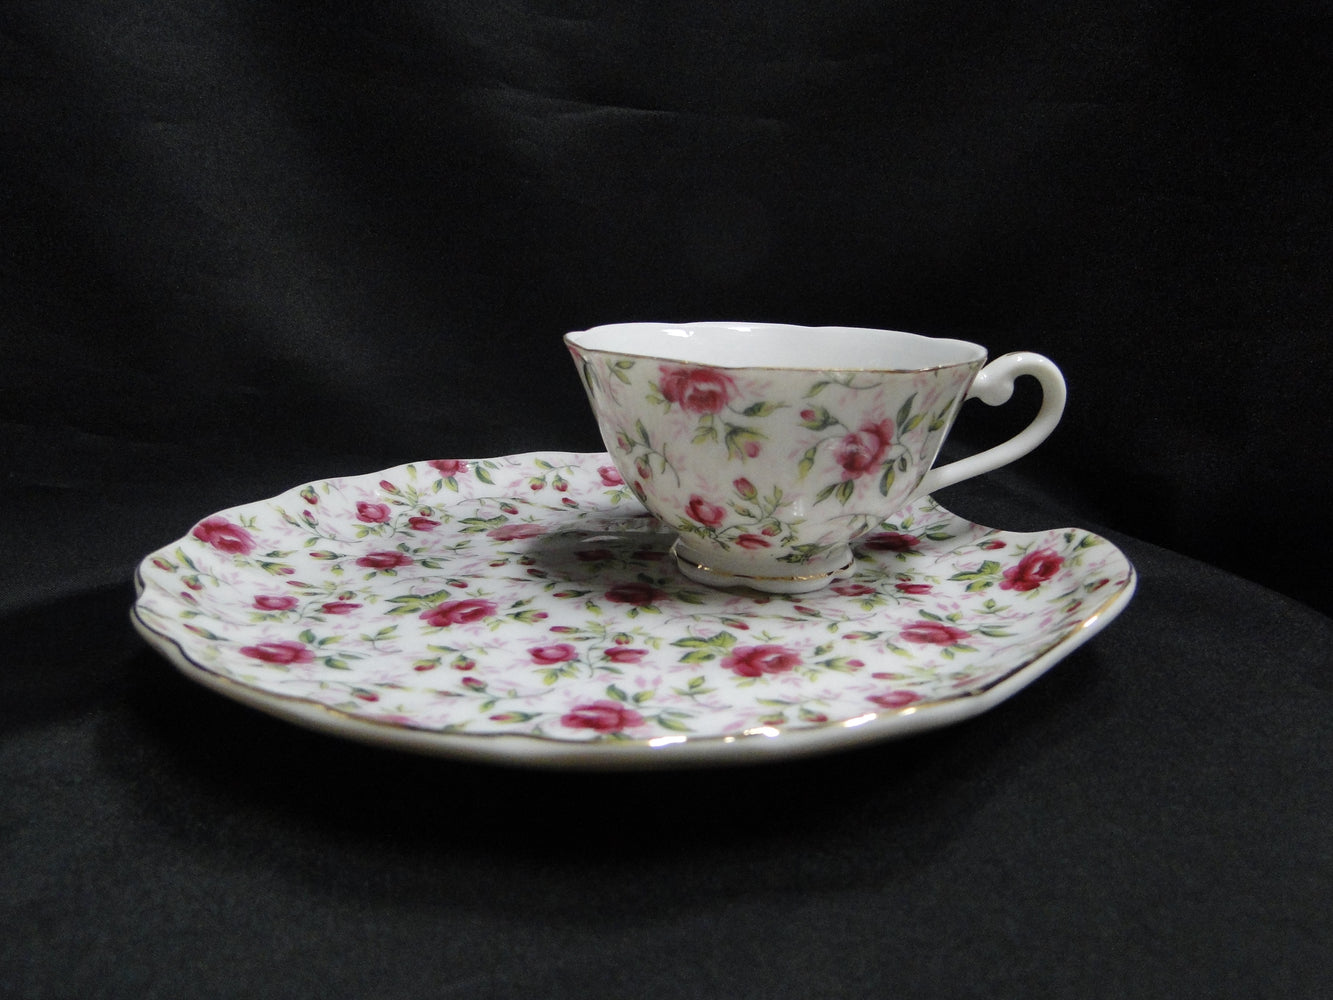 Snack Plate with Teacup Set